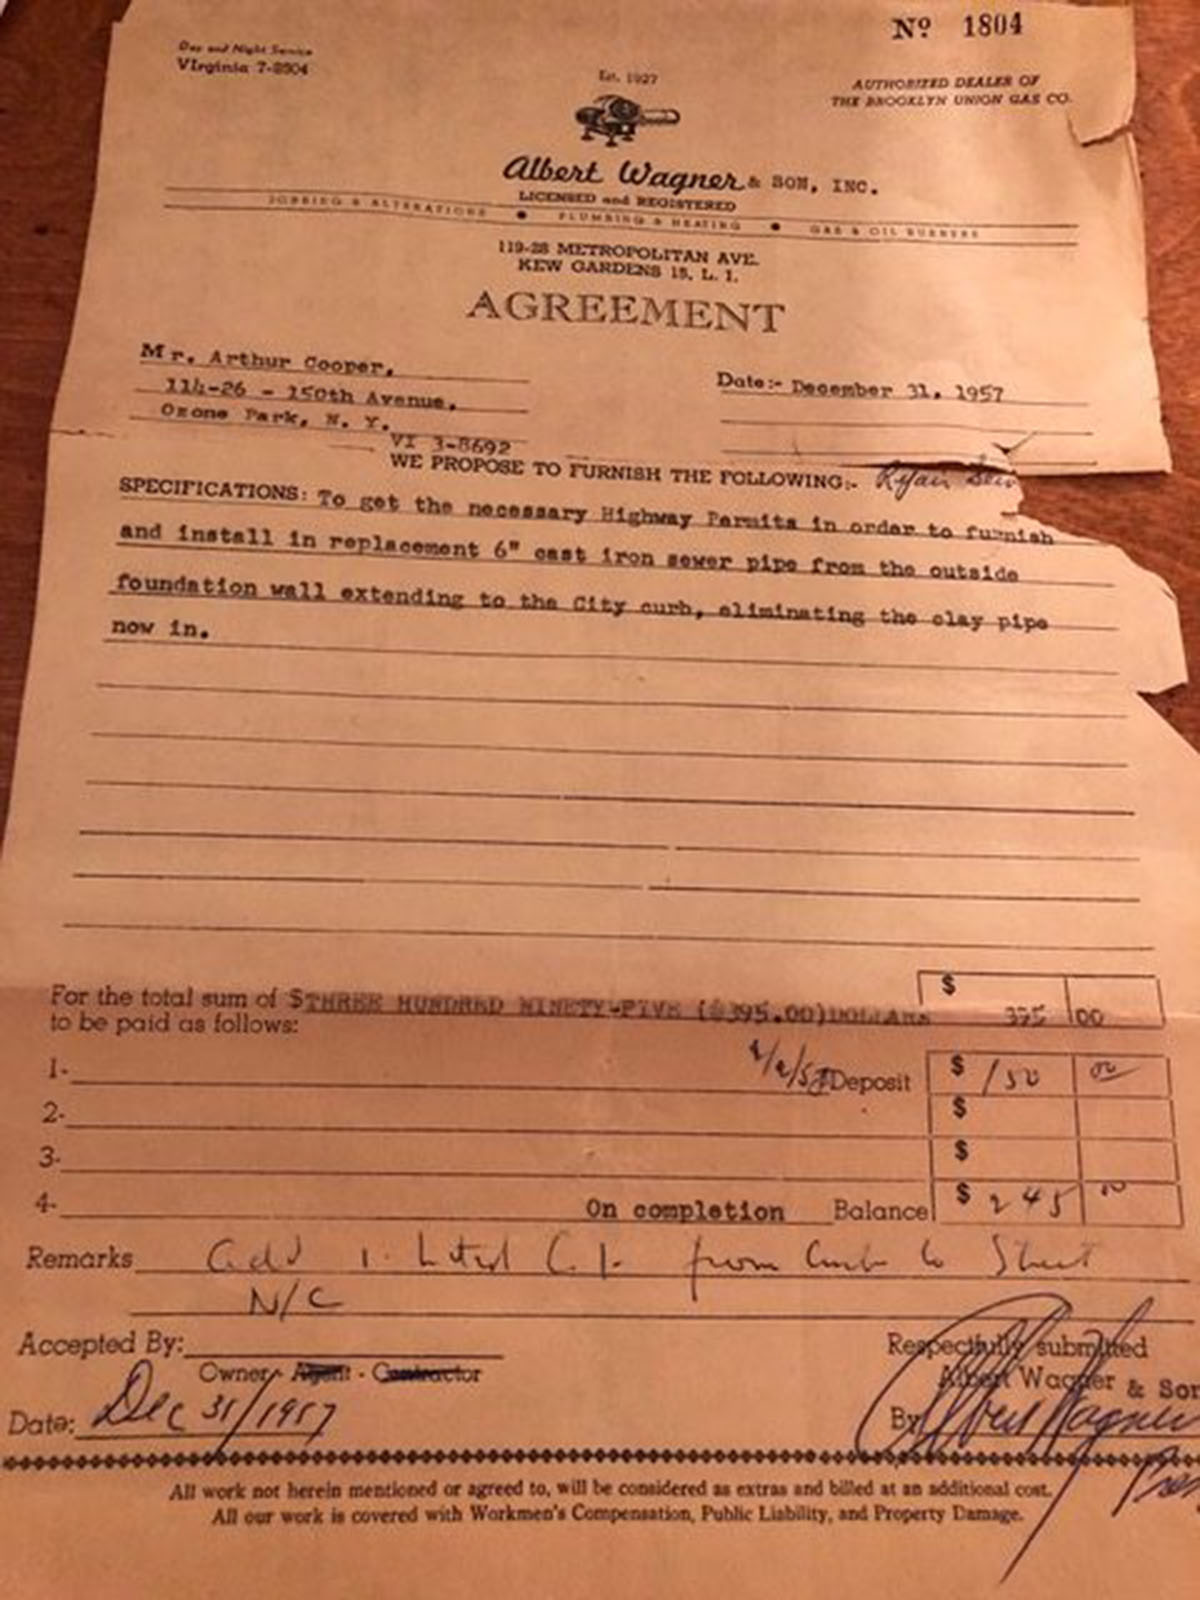 A plumbing bill form 1957 for sewer work.